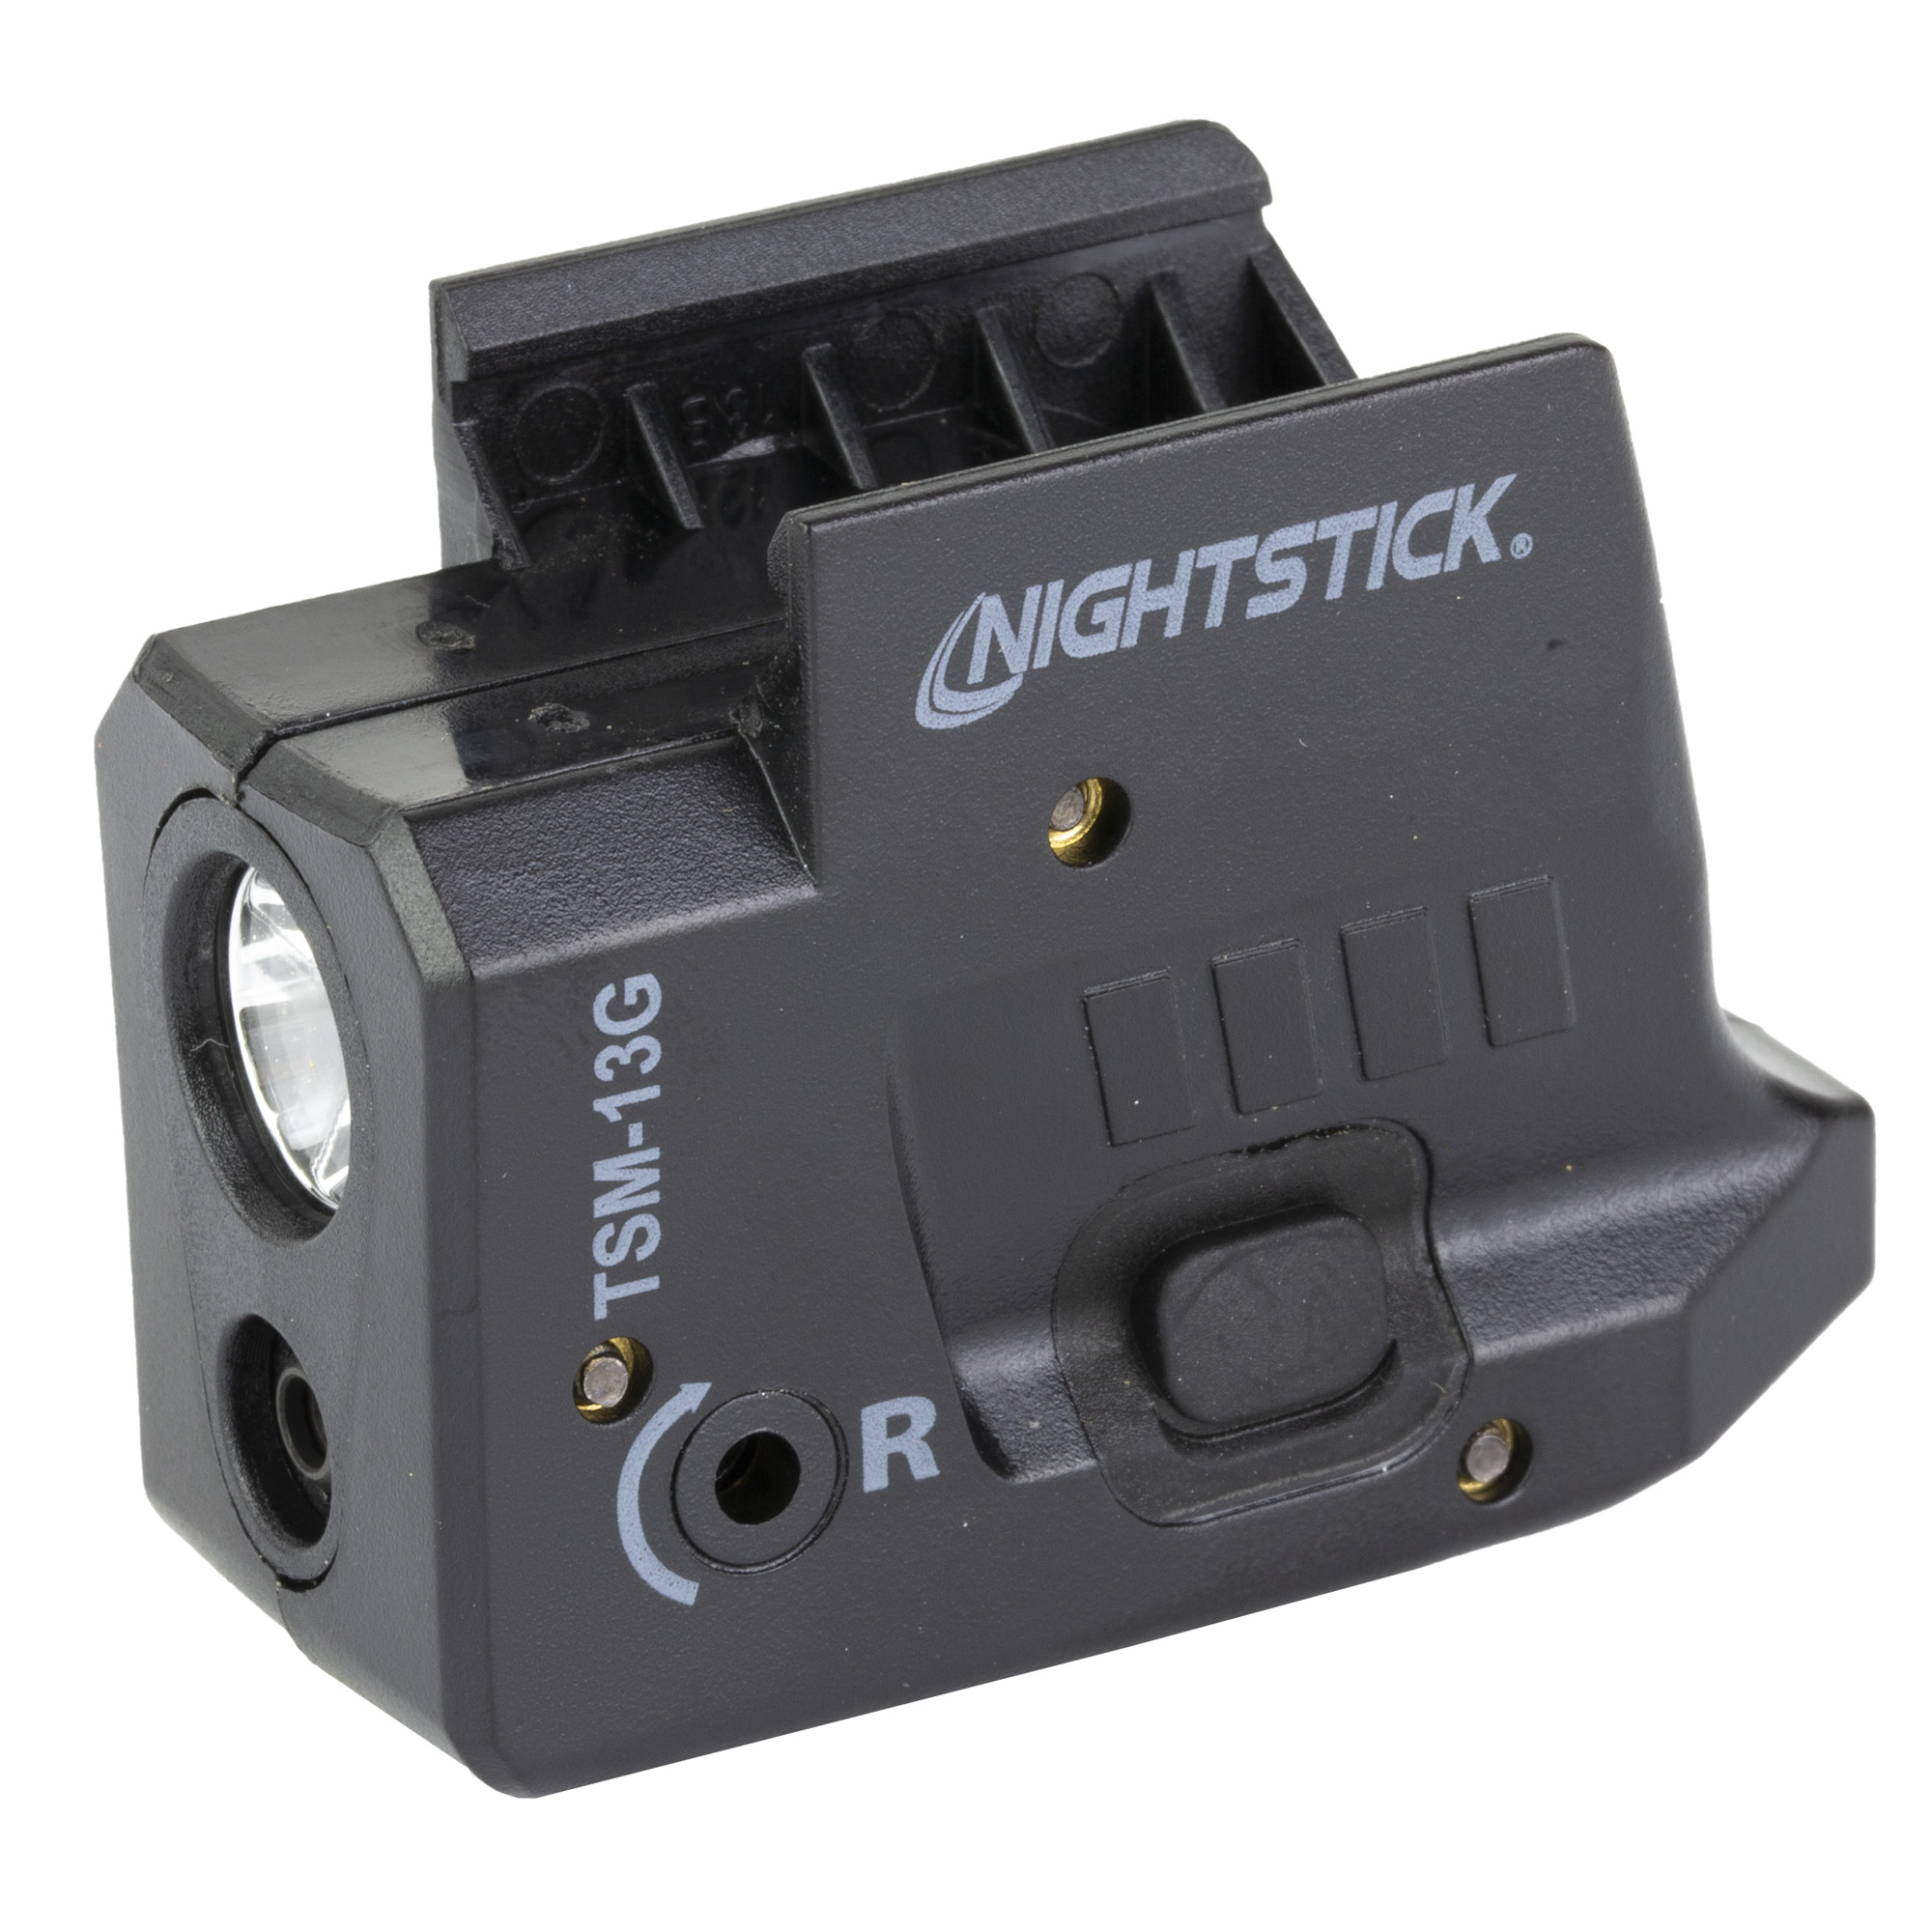 NIGHTSTICK TSM-13G SUBCOMPACT WEAPON-MOUNTED LIGHT W/ GREEN LASER FITS ...